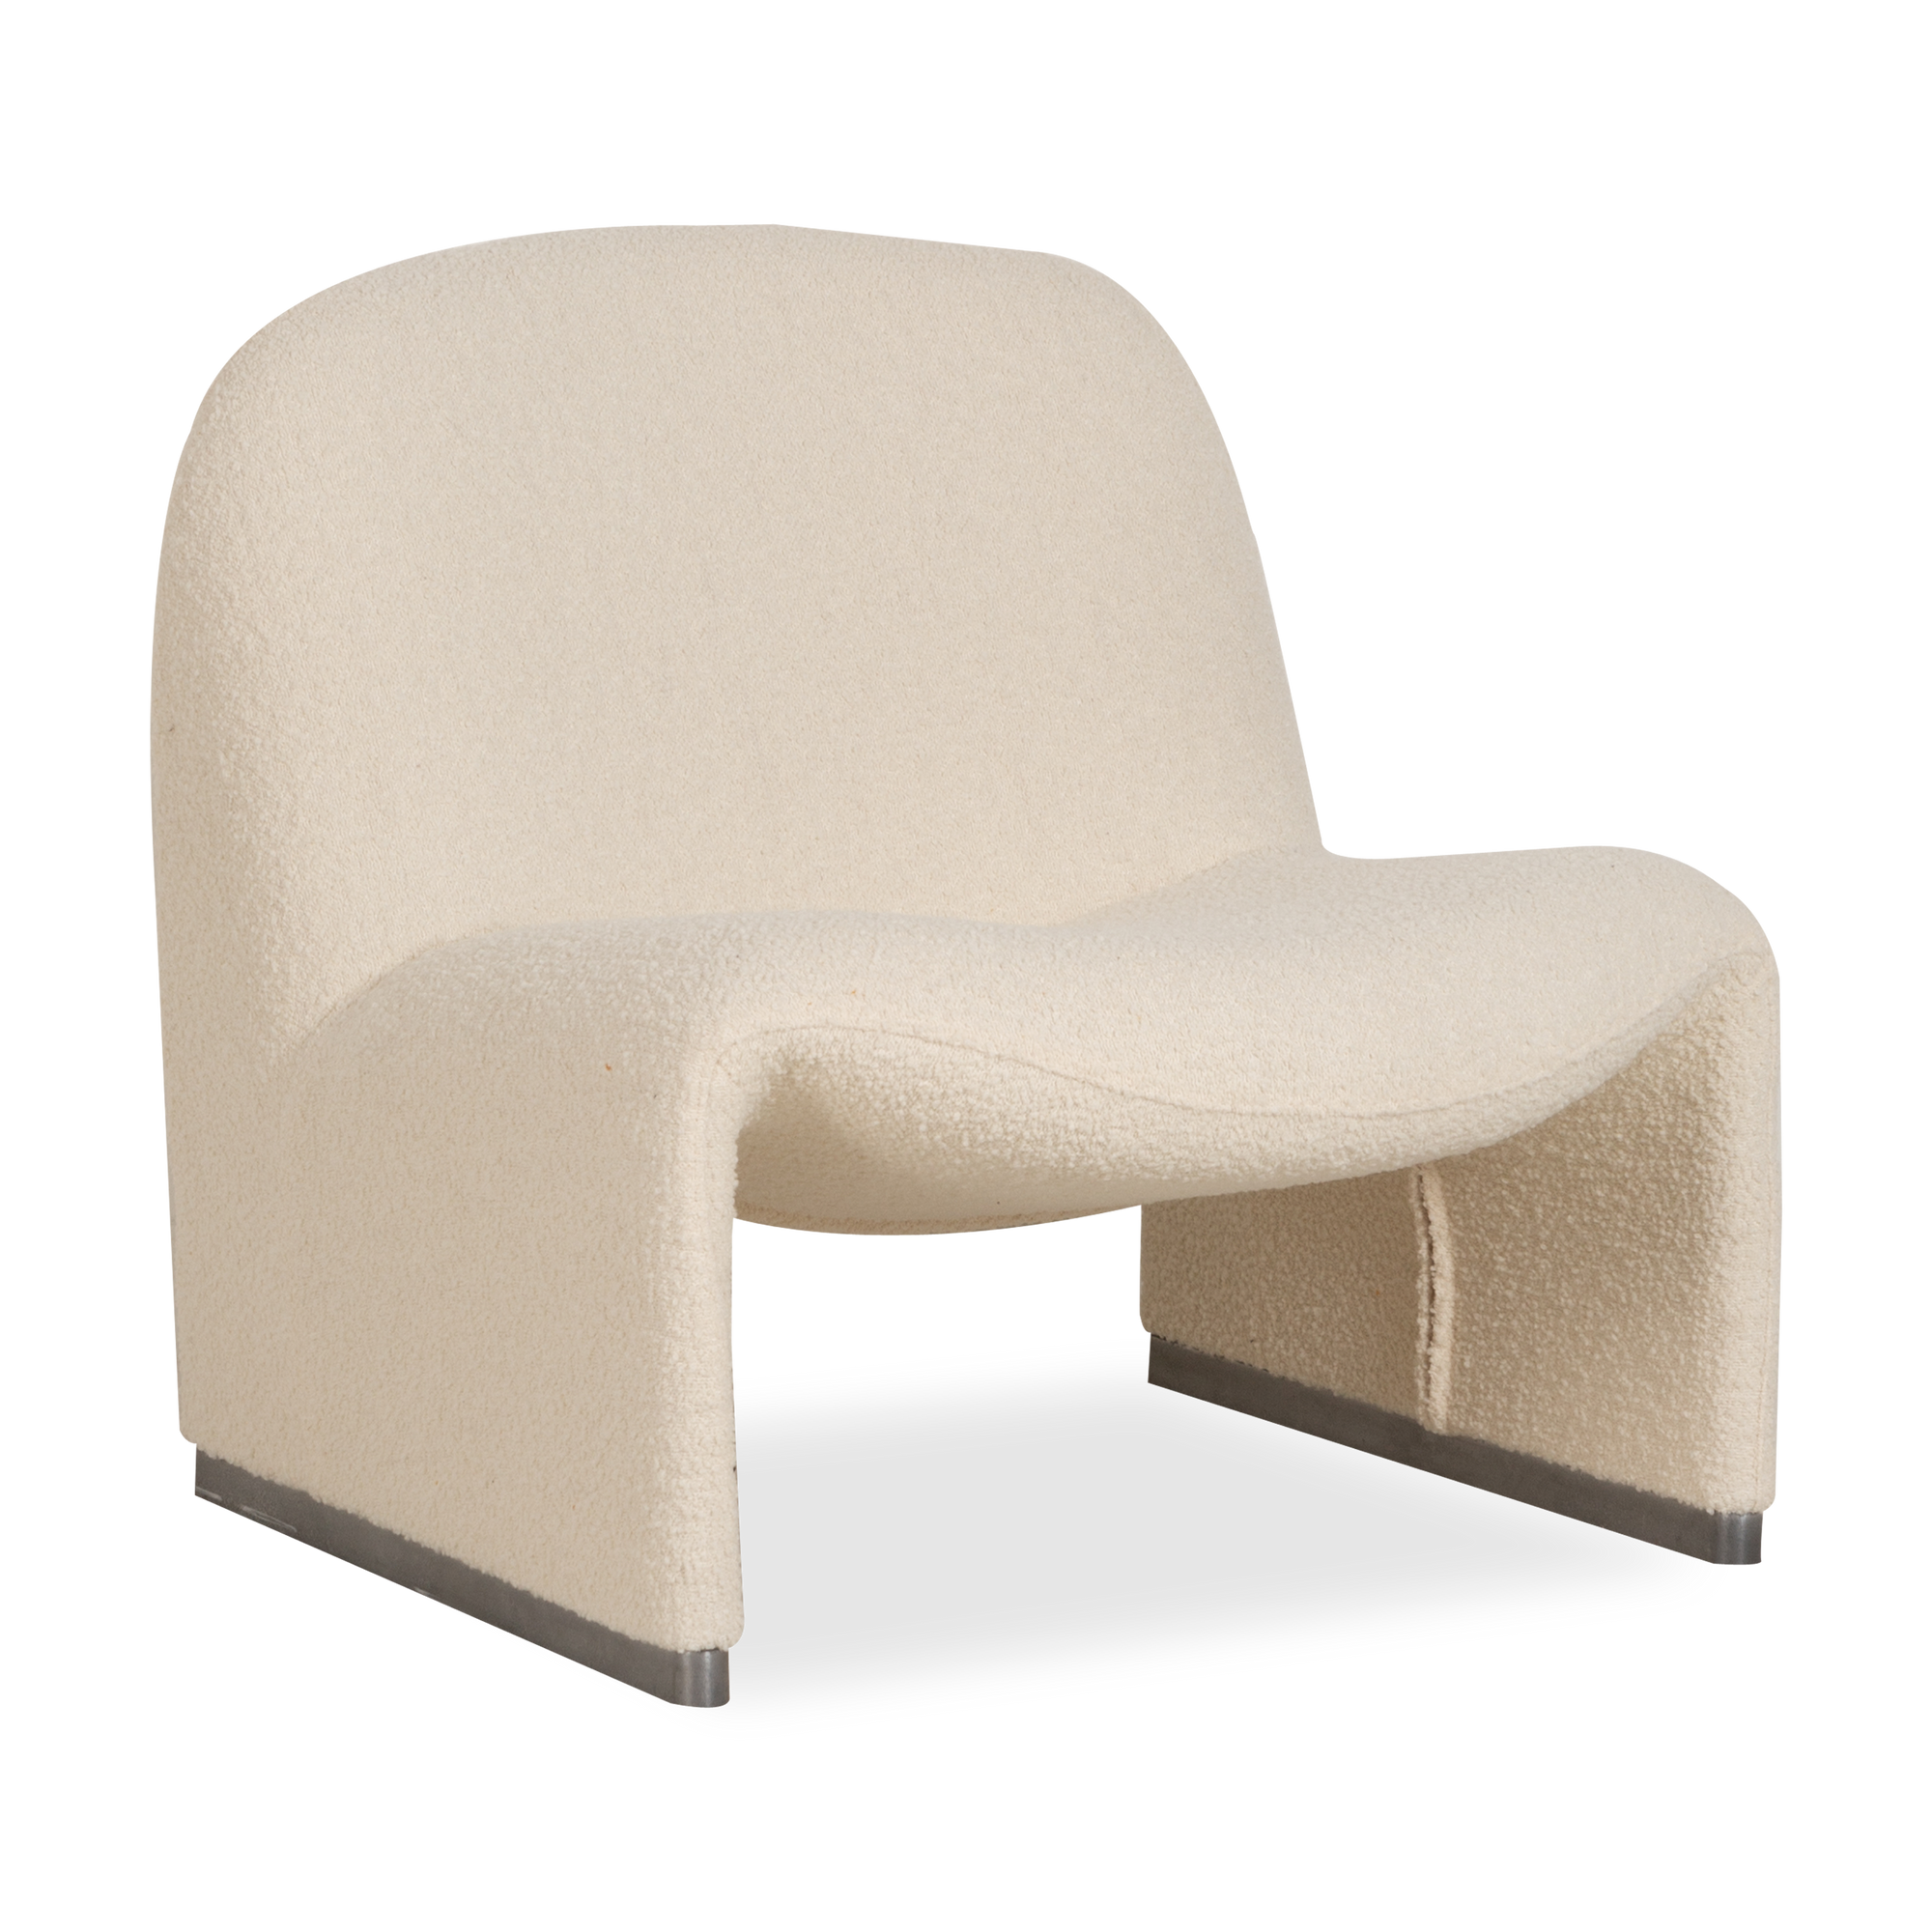 An icon of the mid-century modern style, this vintage Alky Chair was designed by Giancarlo Piretti and produced by Artifort, circa 1960s.